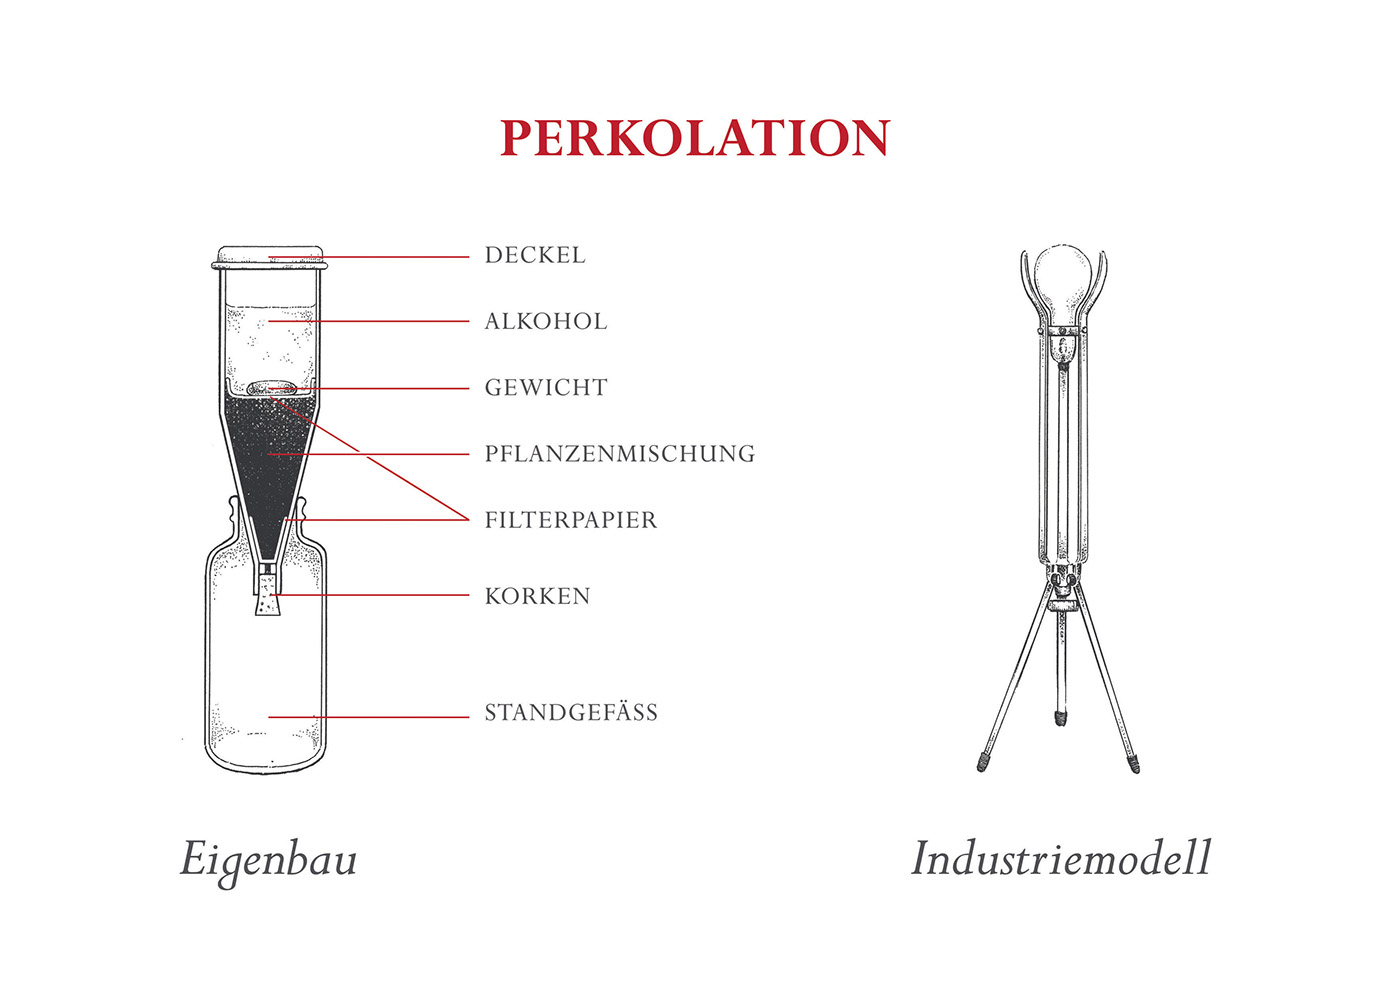 instruction instructions diagram information graphics ILLUSTRATION  Packaging how to gin infusion Production